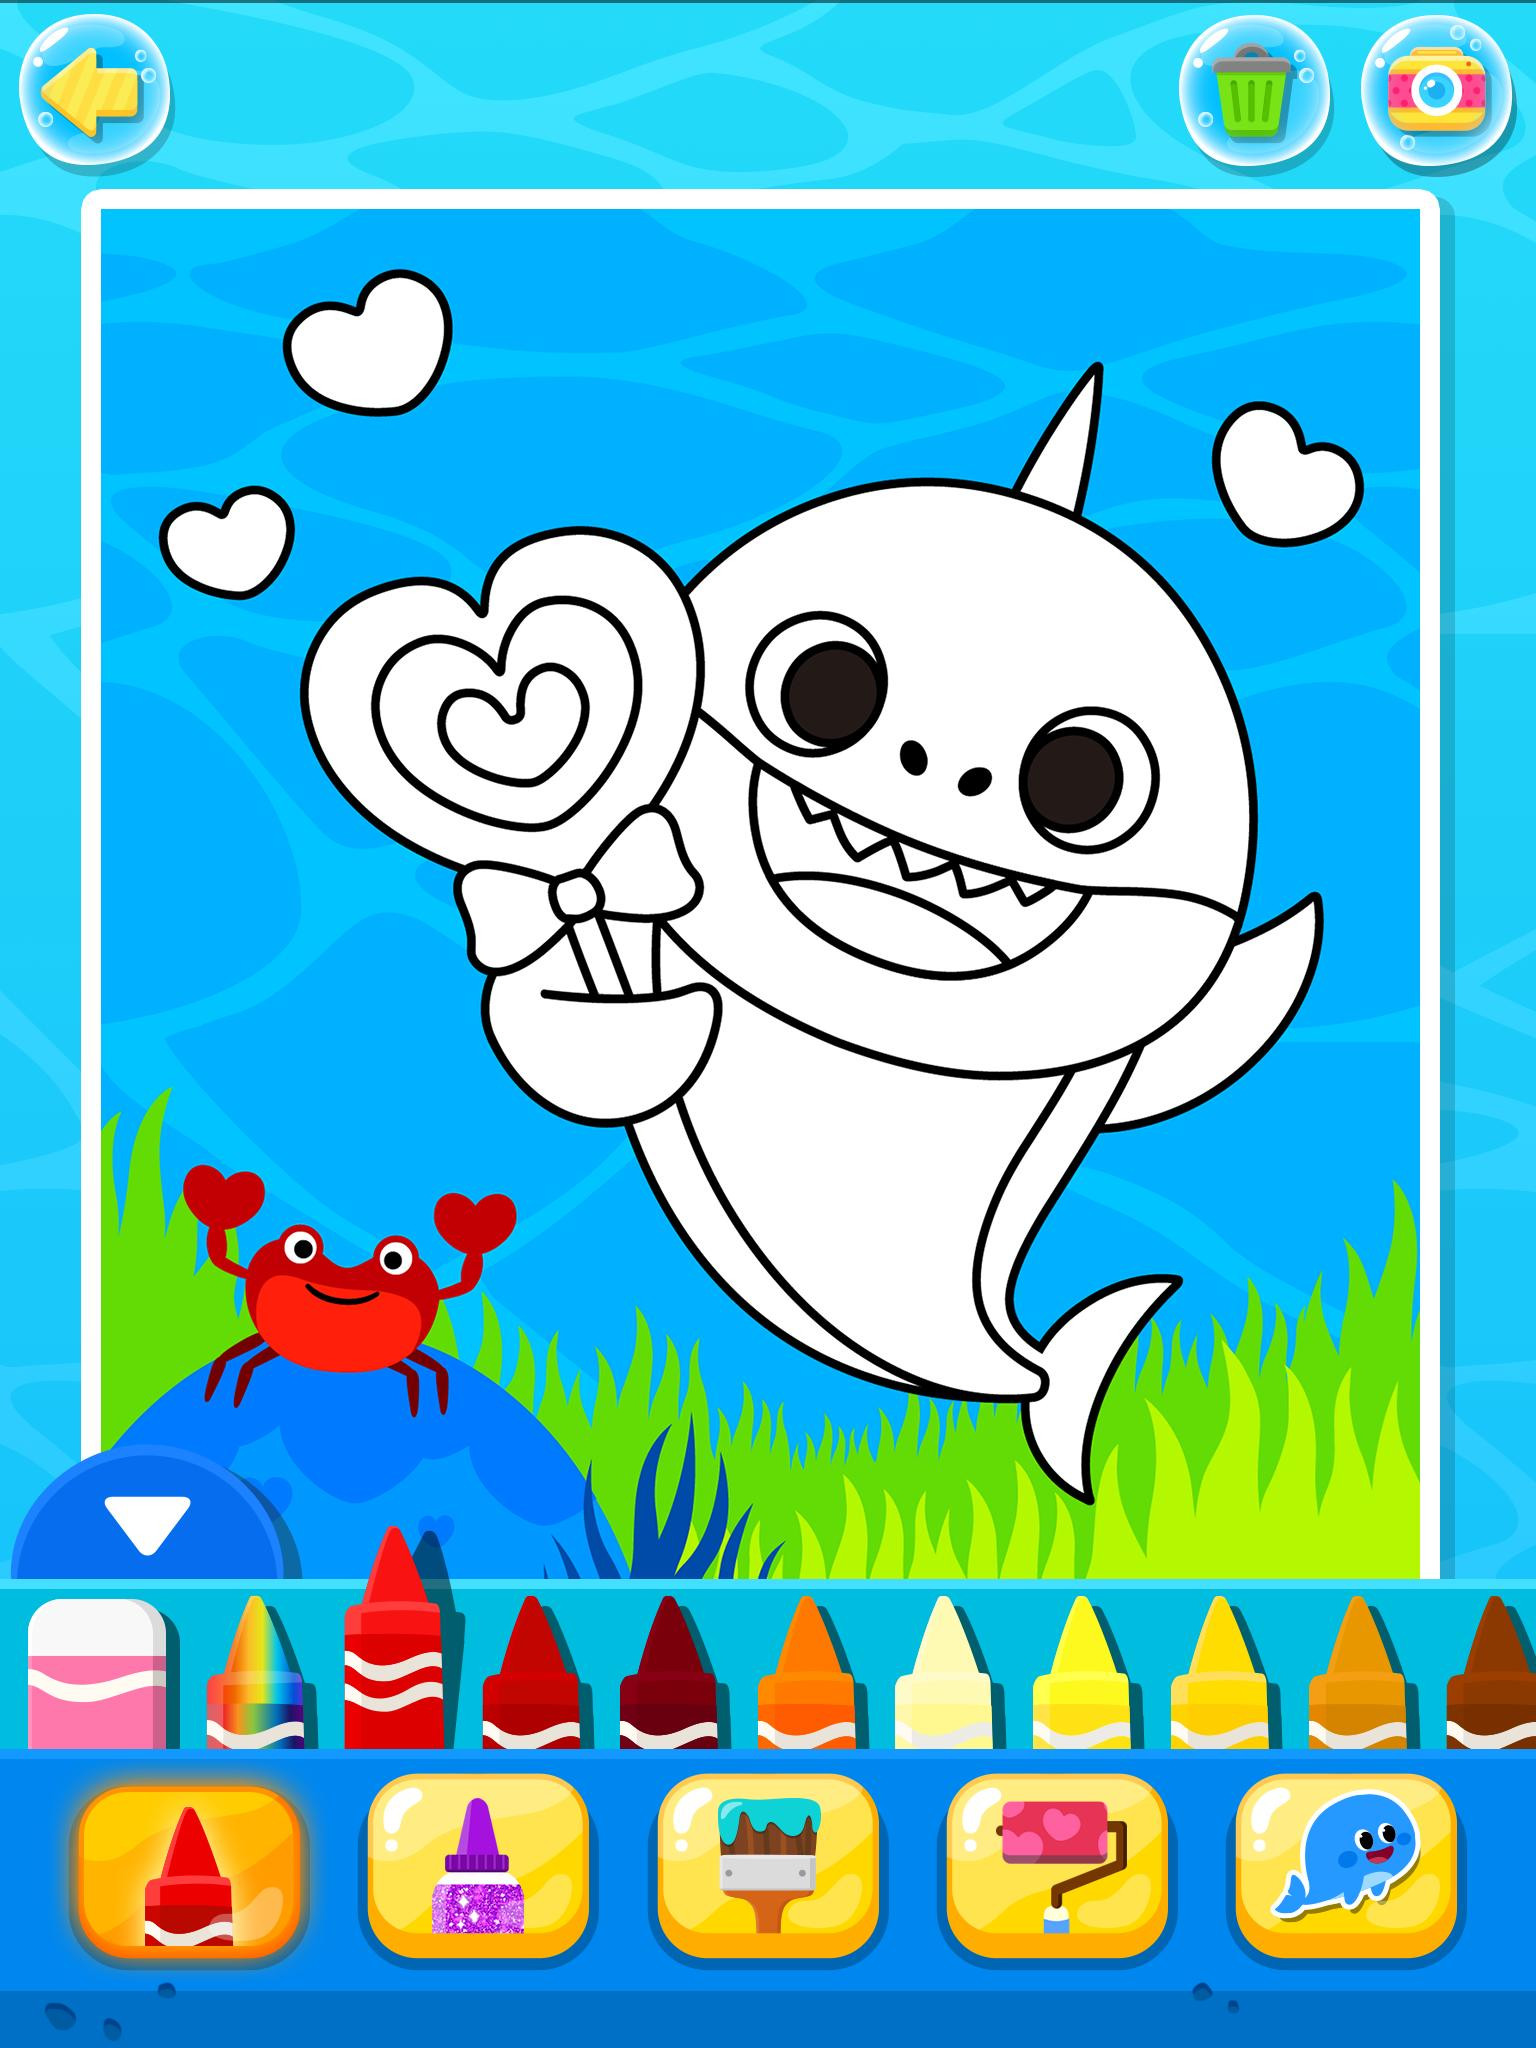 Pinkfong Baby Shark Coloring Pages
 Pinkfong Baby Shark Coloring Book for Android APK Download